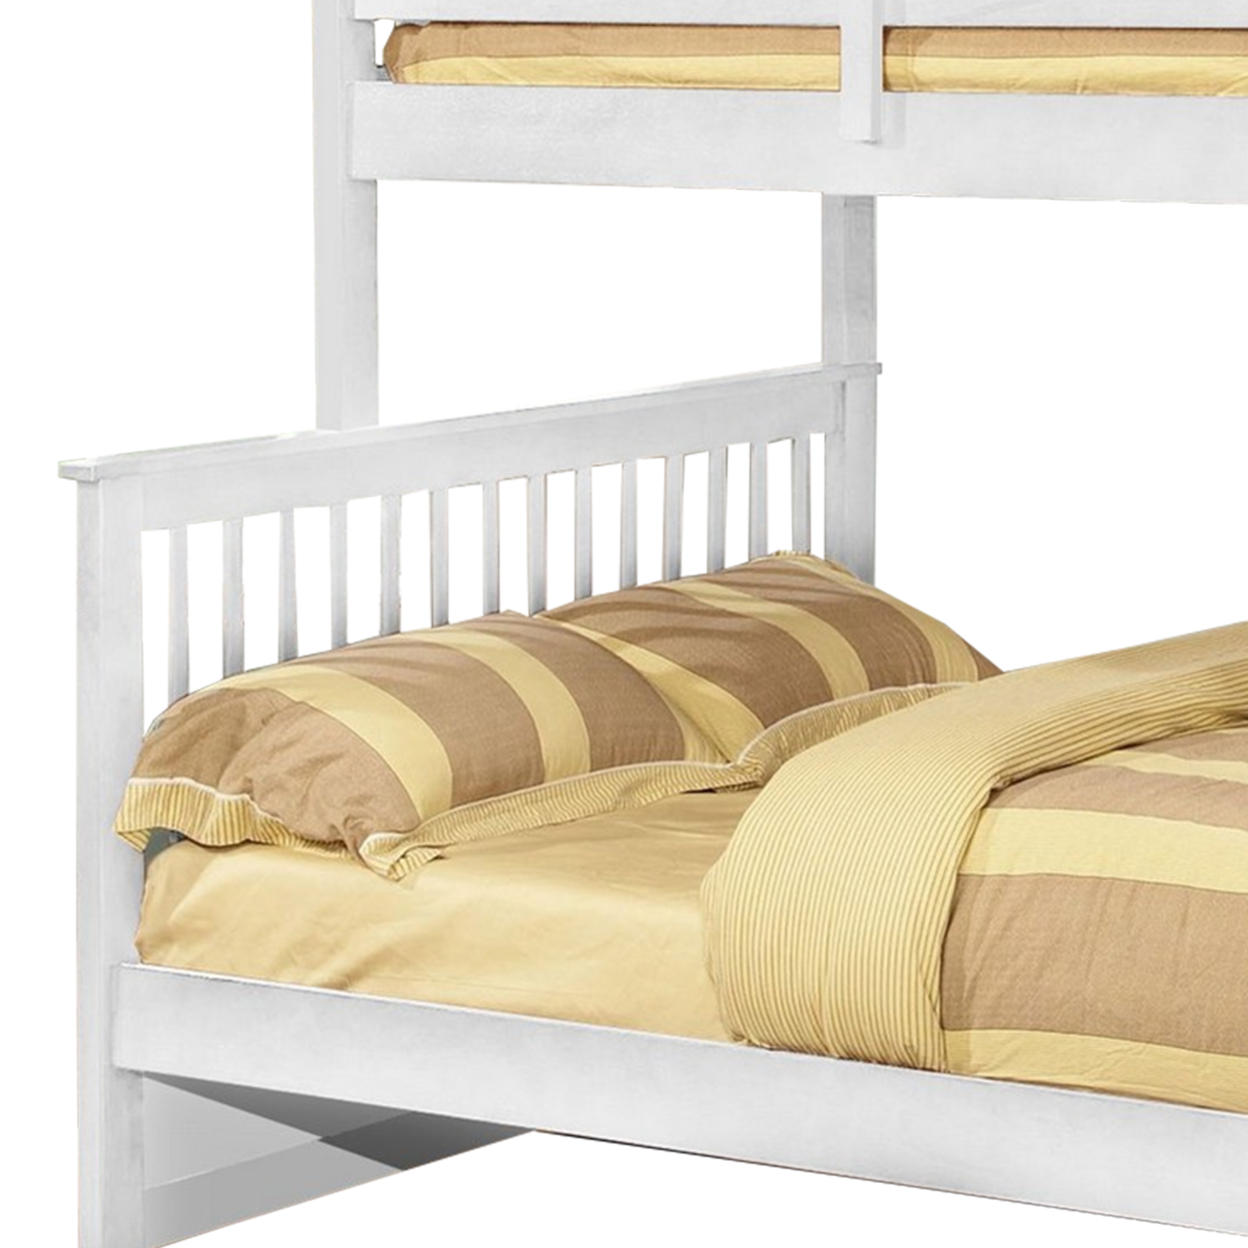 Mission Style Wooden Twin Over Full Bunk Bed With Slatted Headboard, White- Saltoro Sherpi